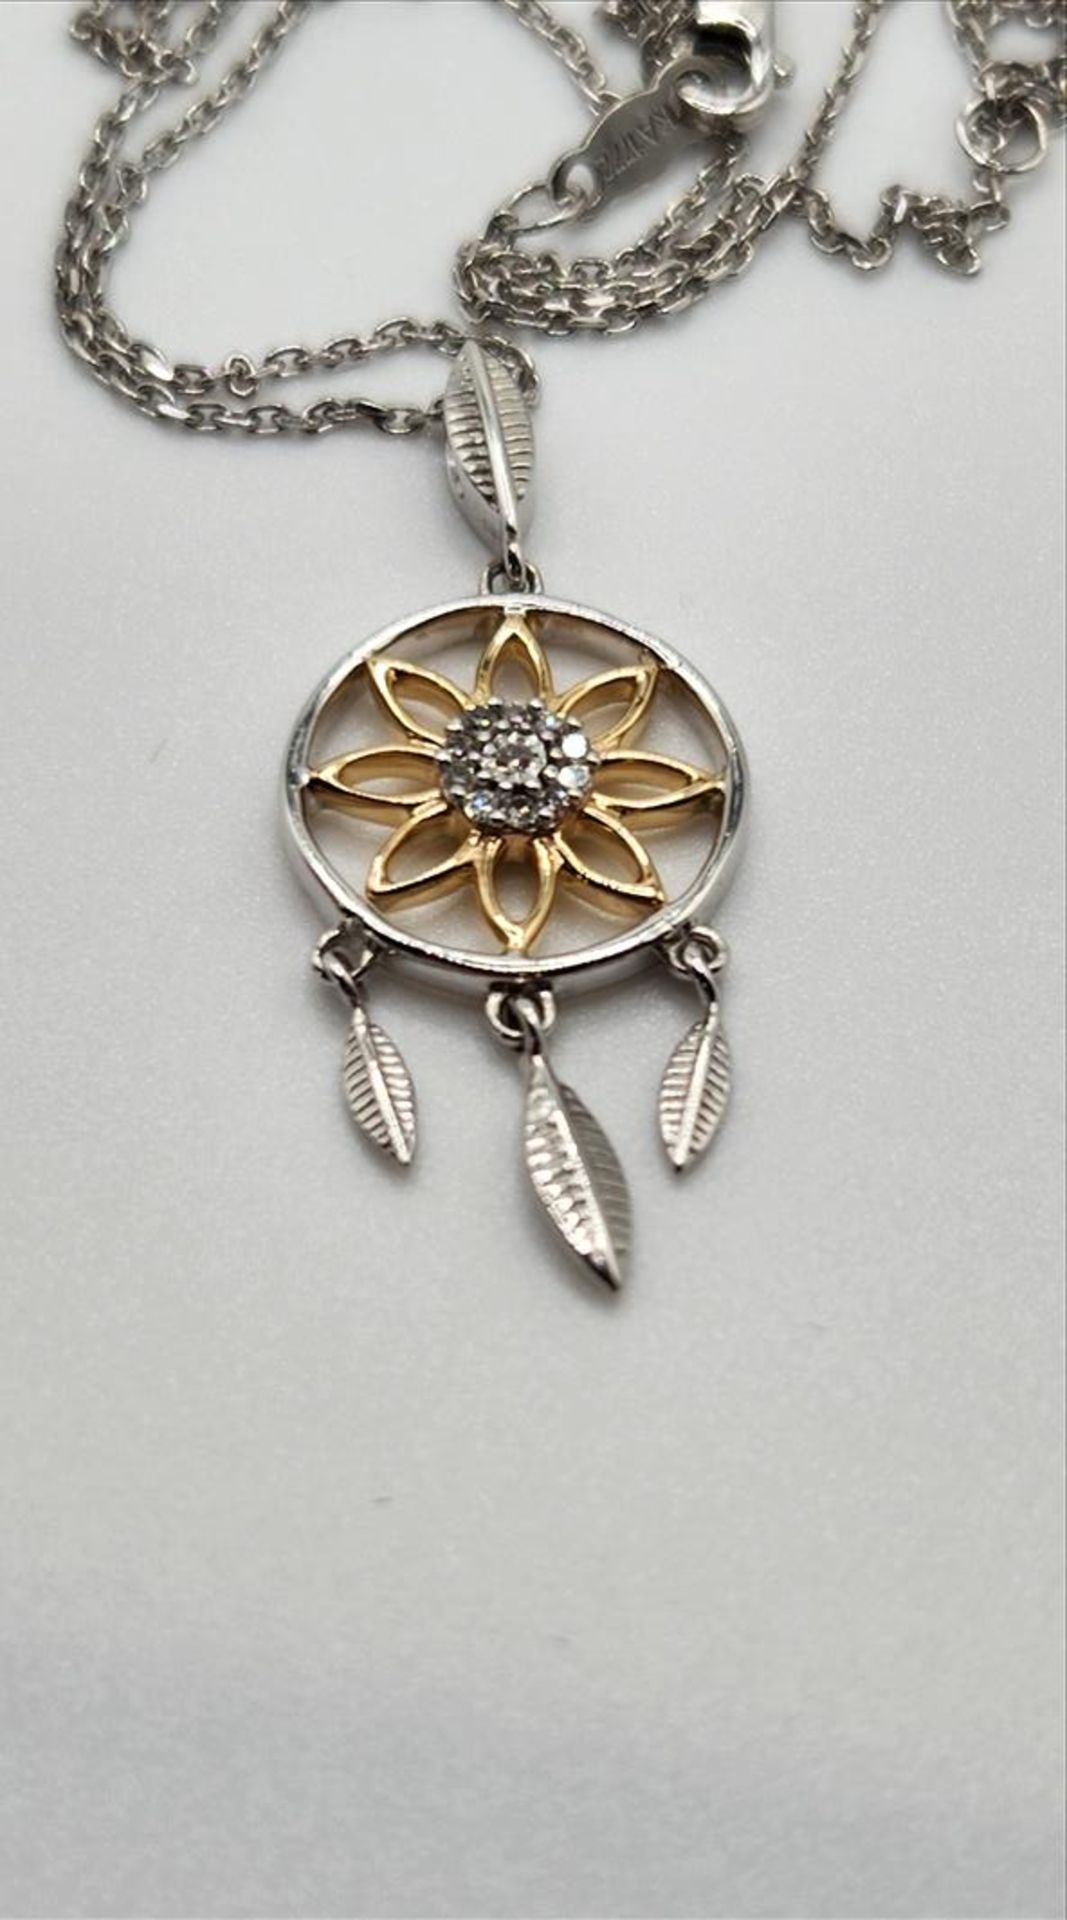 10k white gold and sterling silver dream catcher necklace - Image 3 of 5